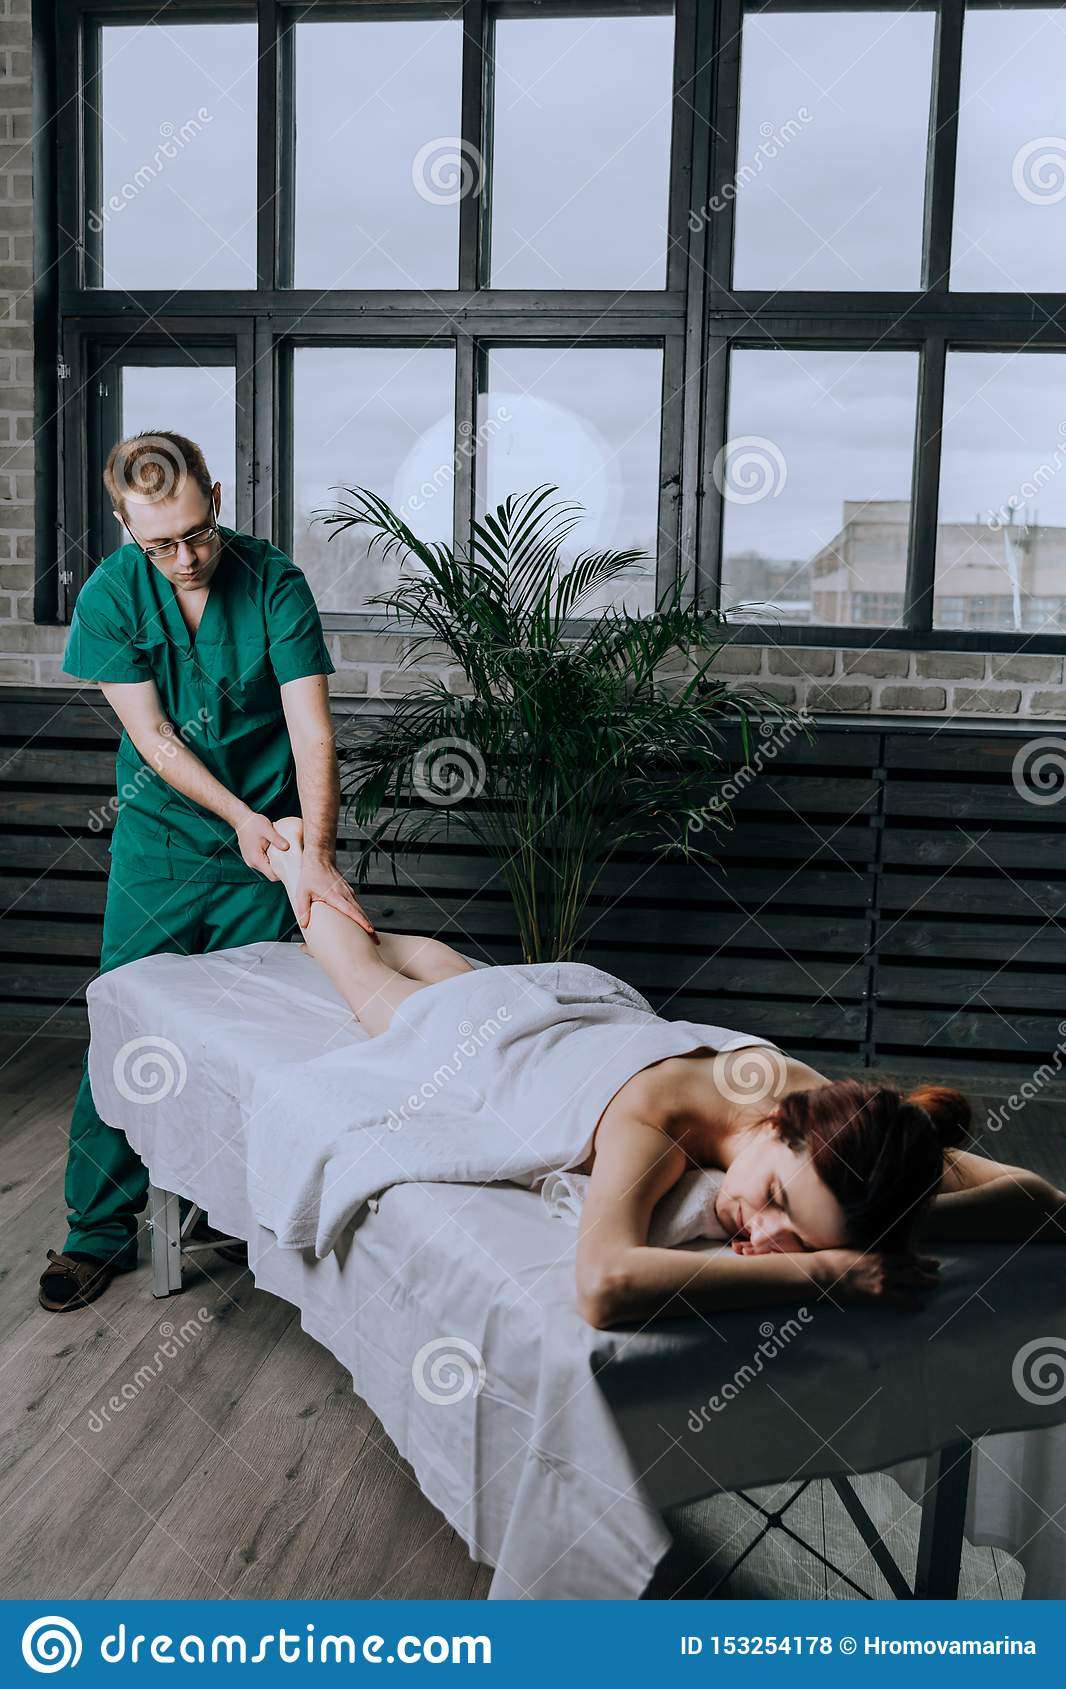 A Male Massage Therapist Massages A Young Woman, A Method ...